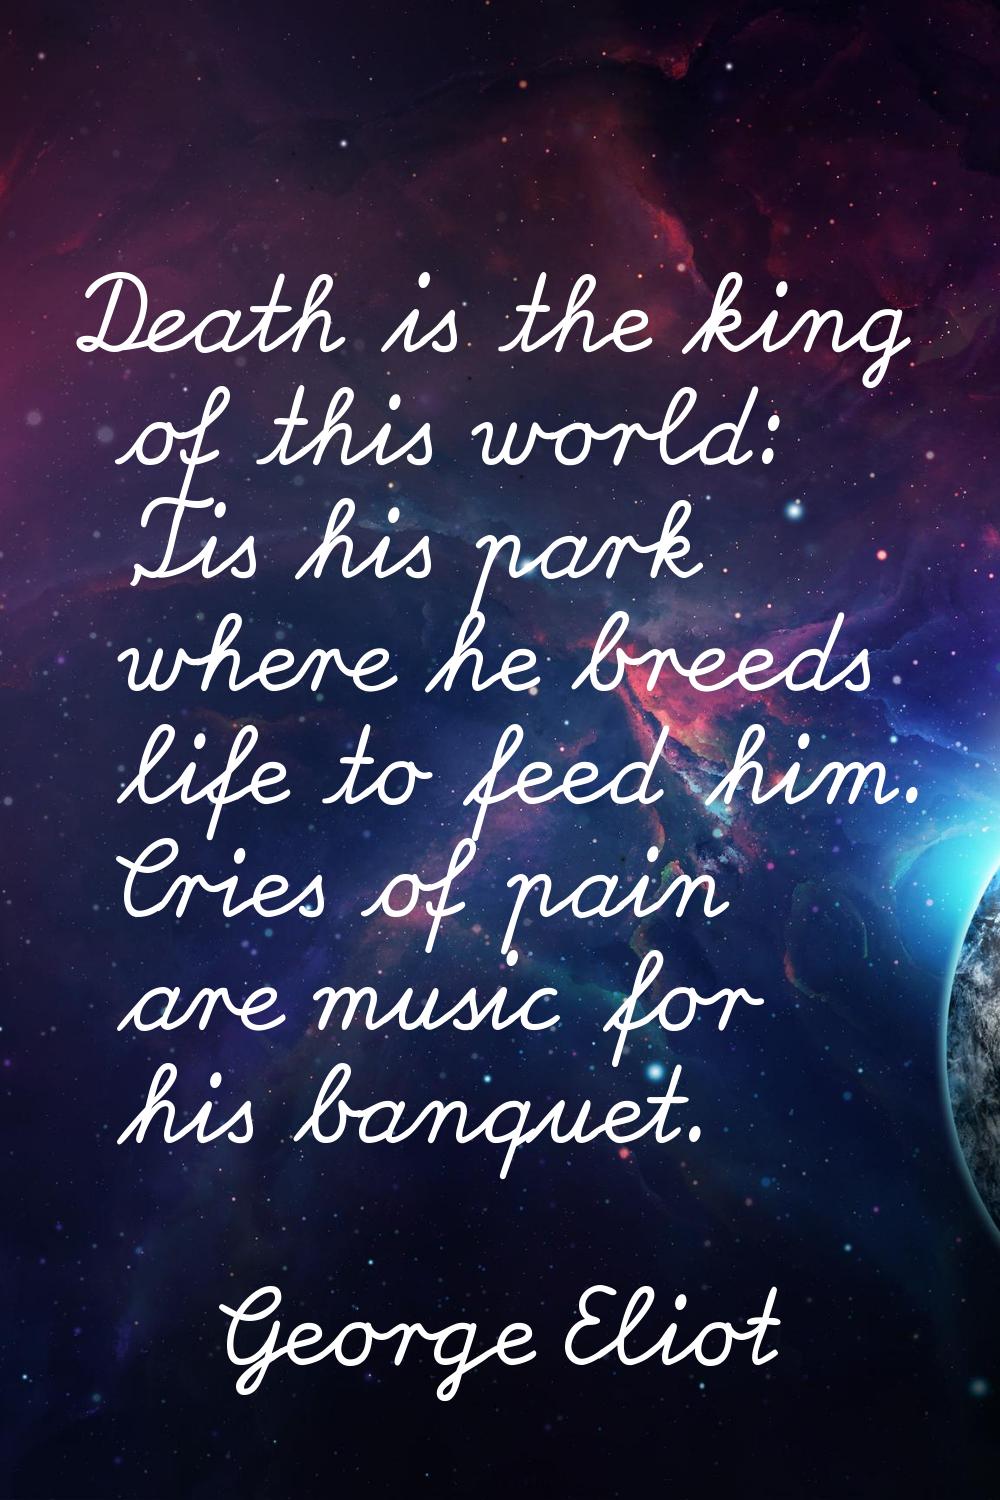 Death is the king of this world: 'Tis his park where he breeds life to feed him. Cries of pain are 